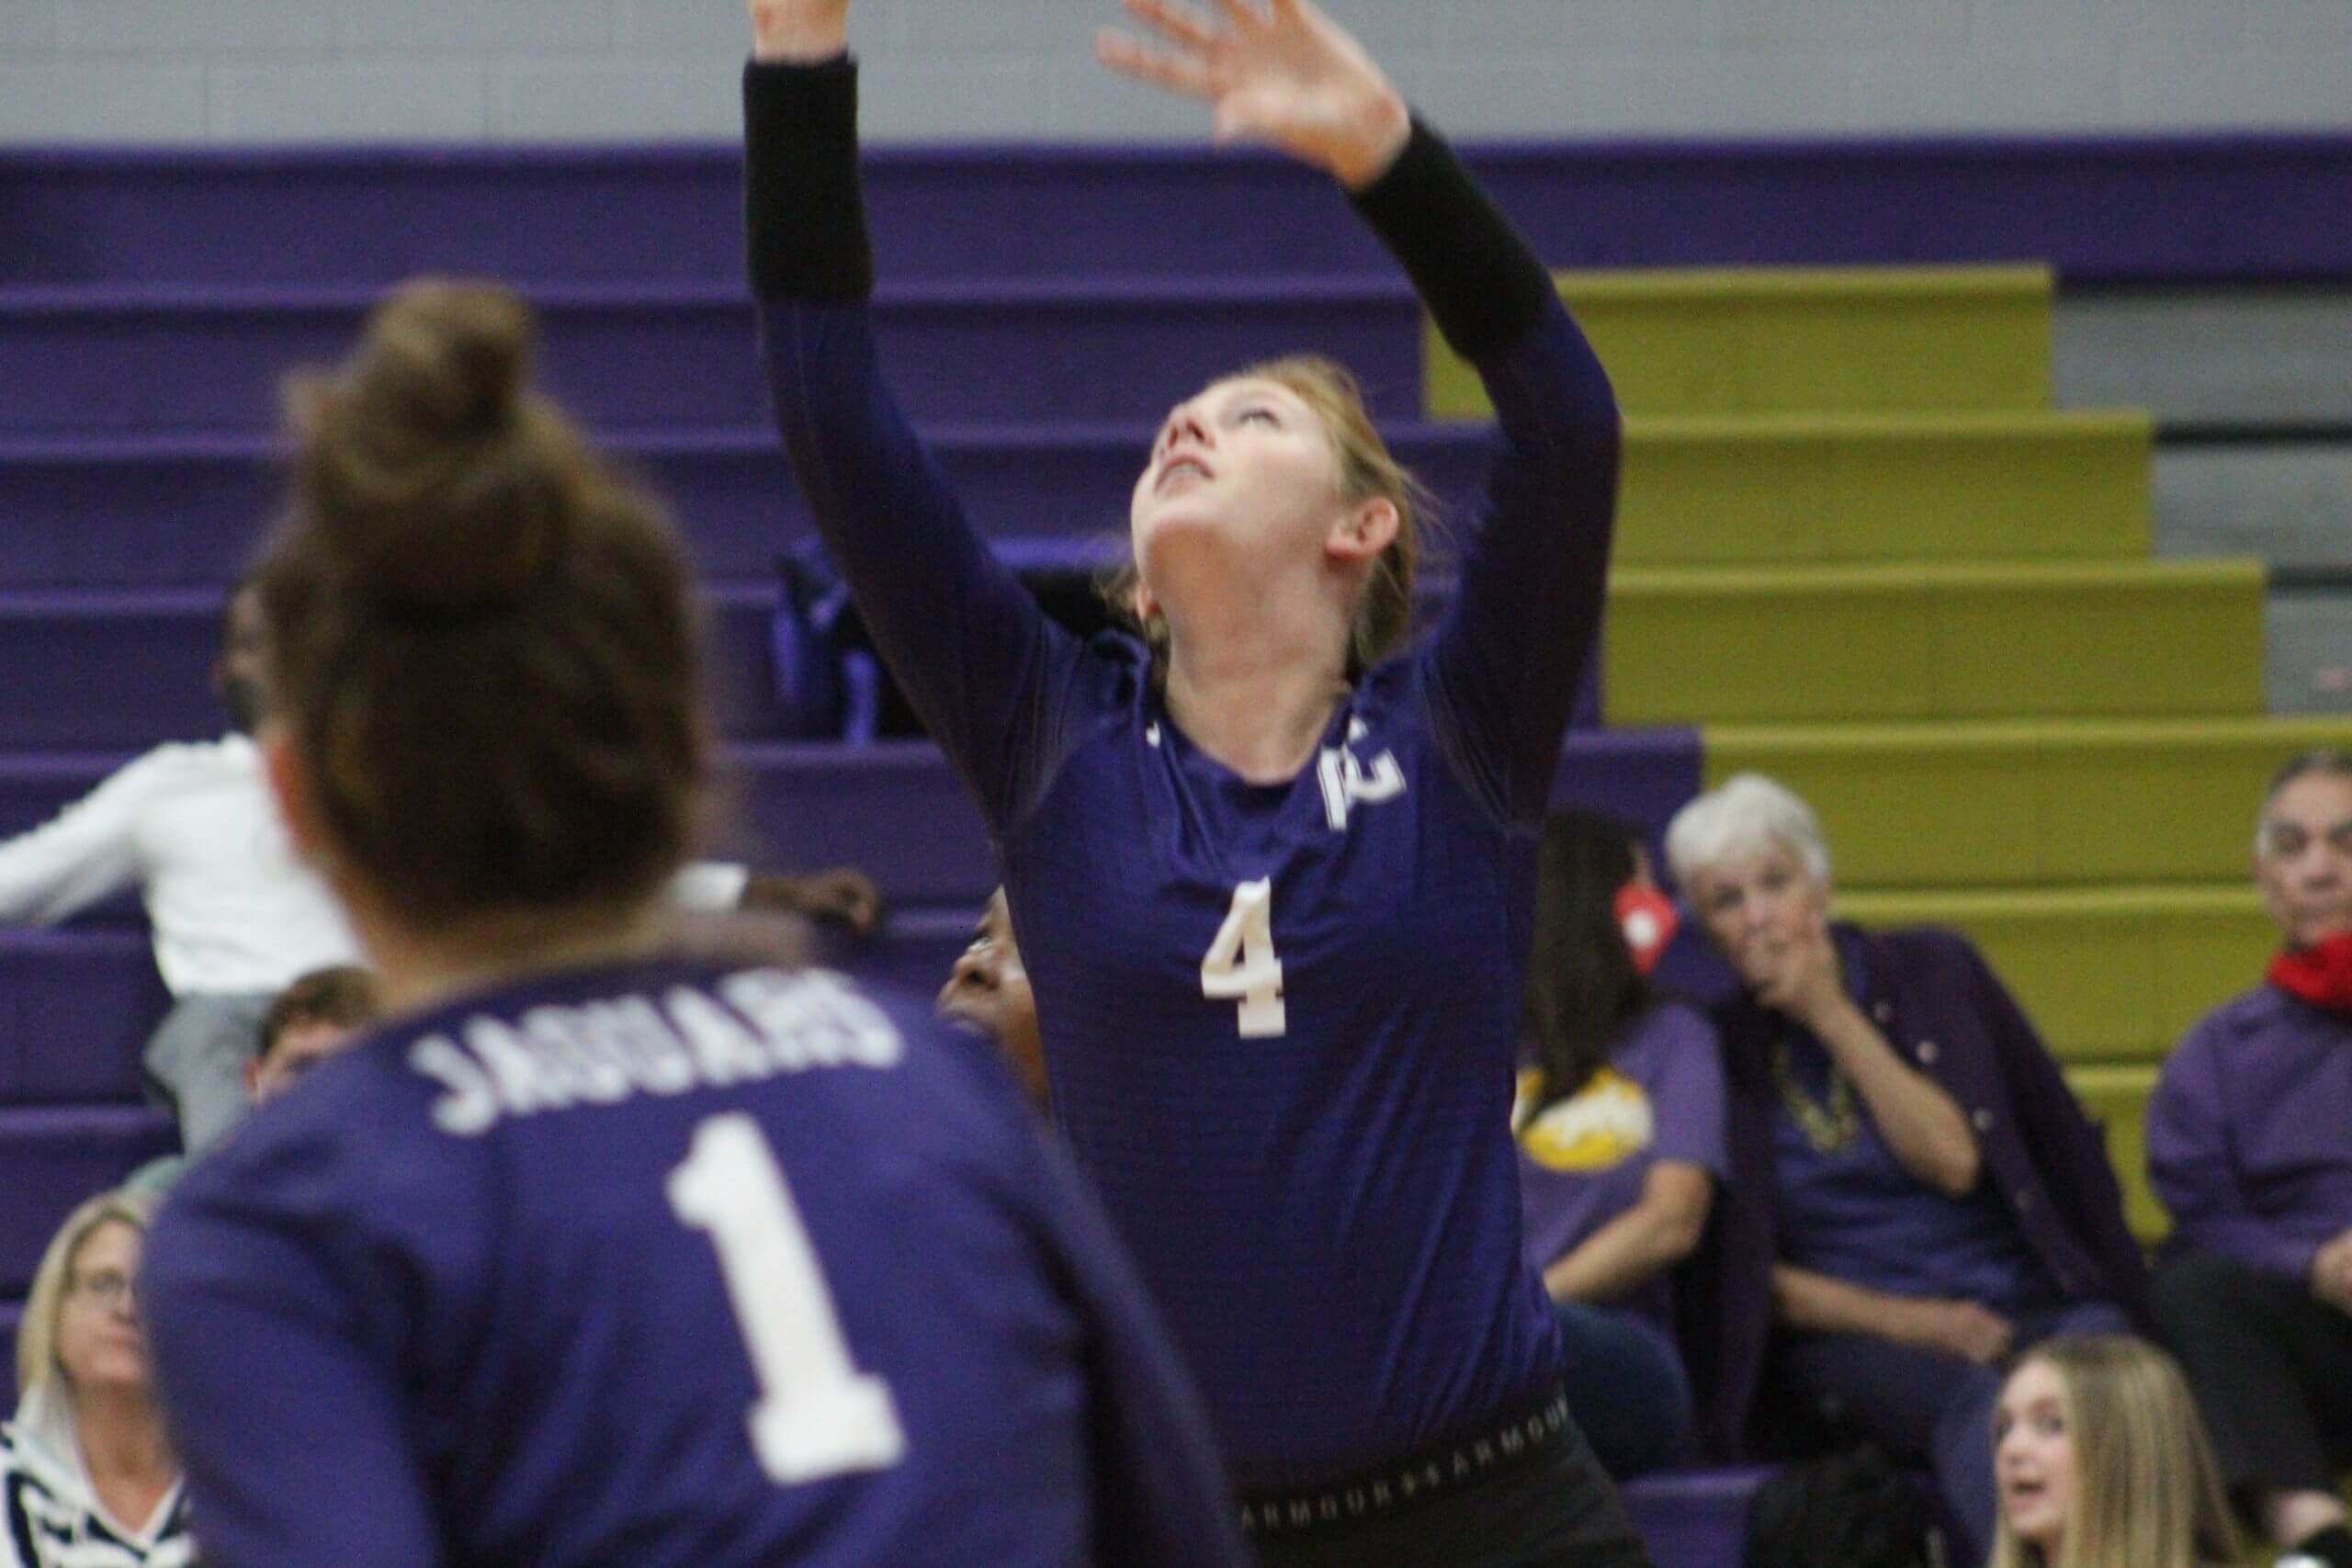 Capes Buss named county volleyball player of week